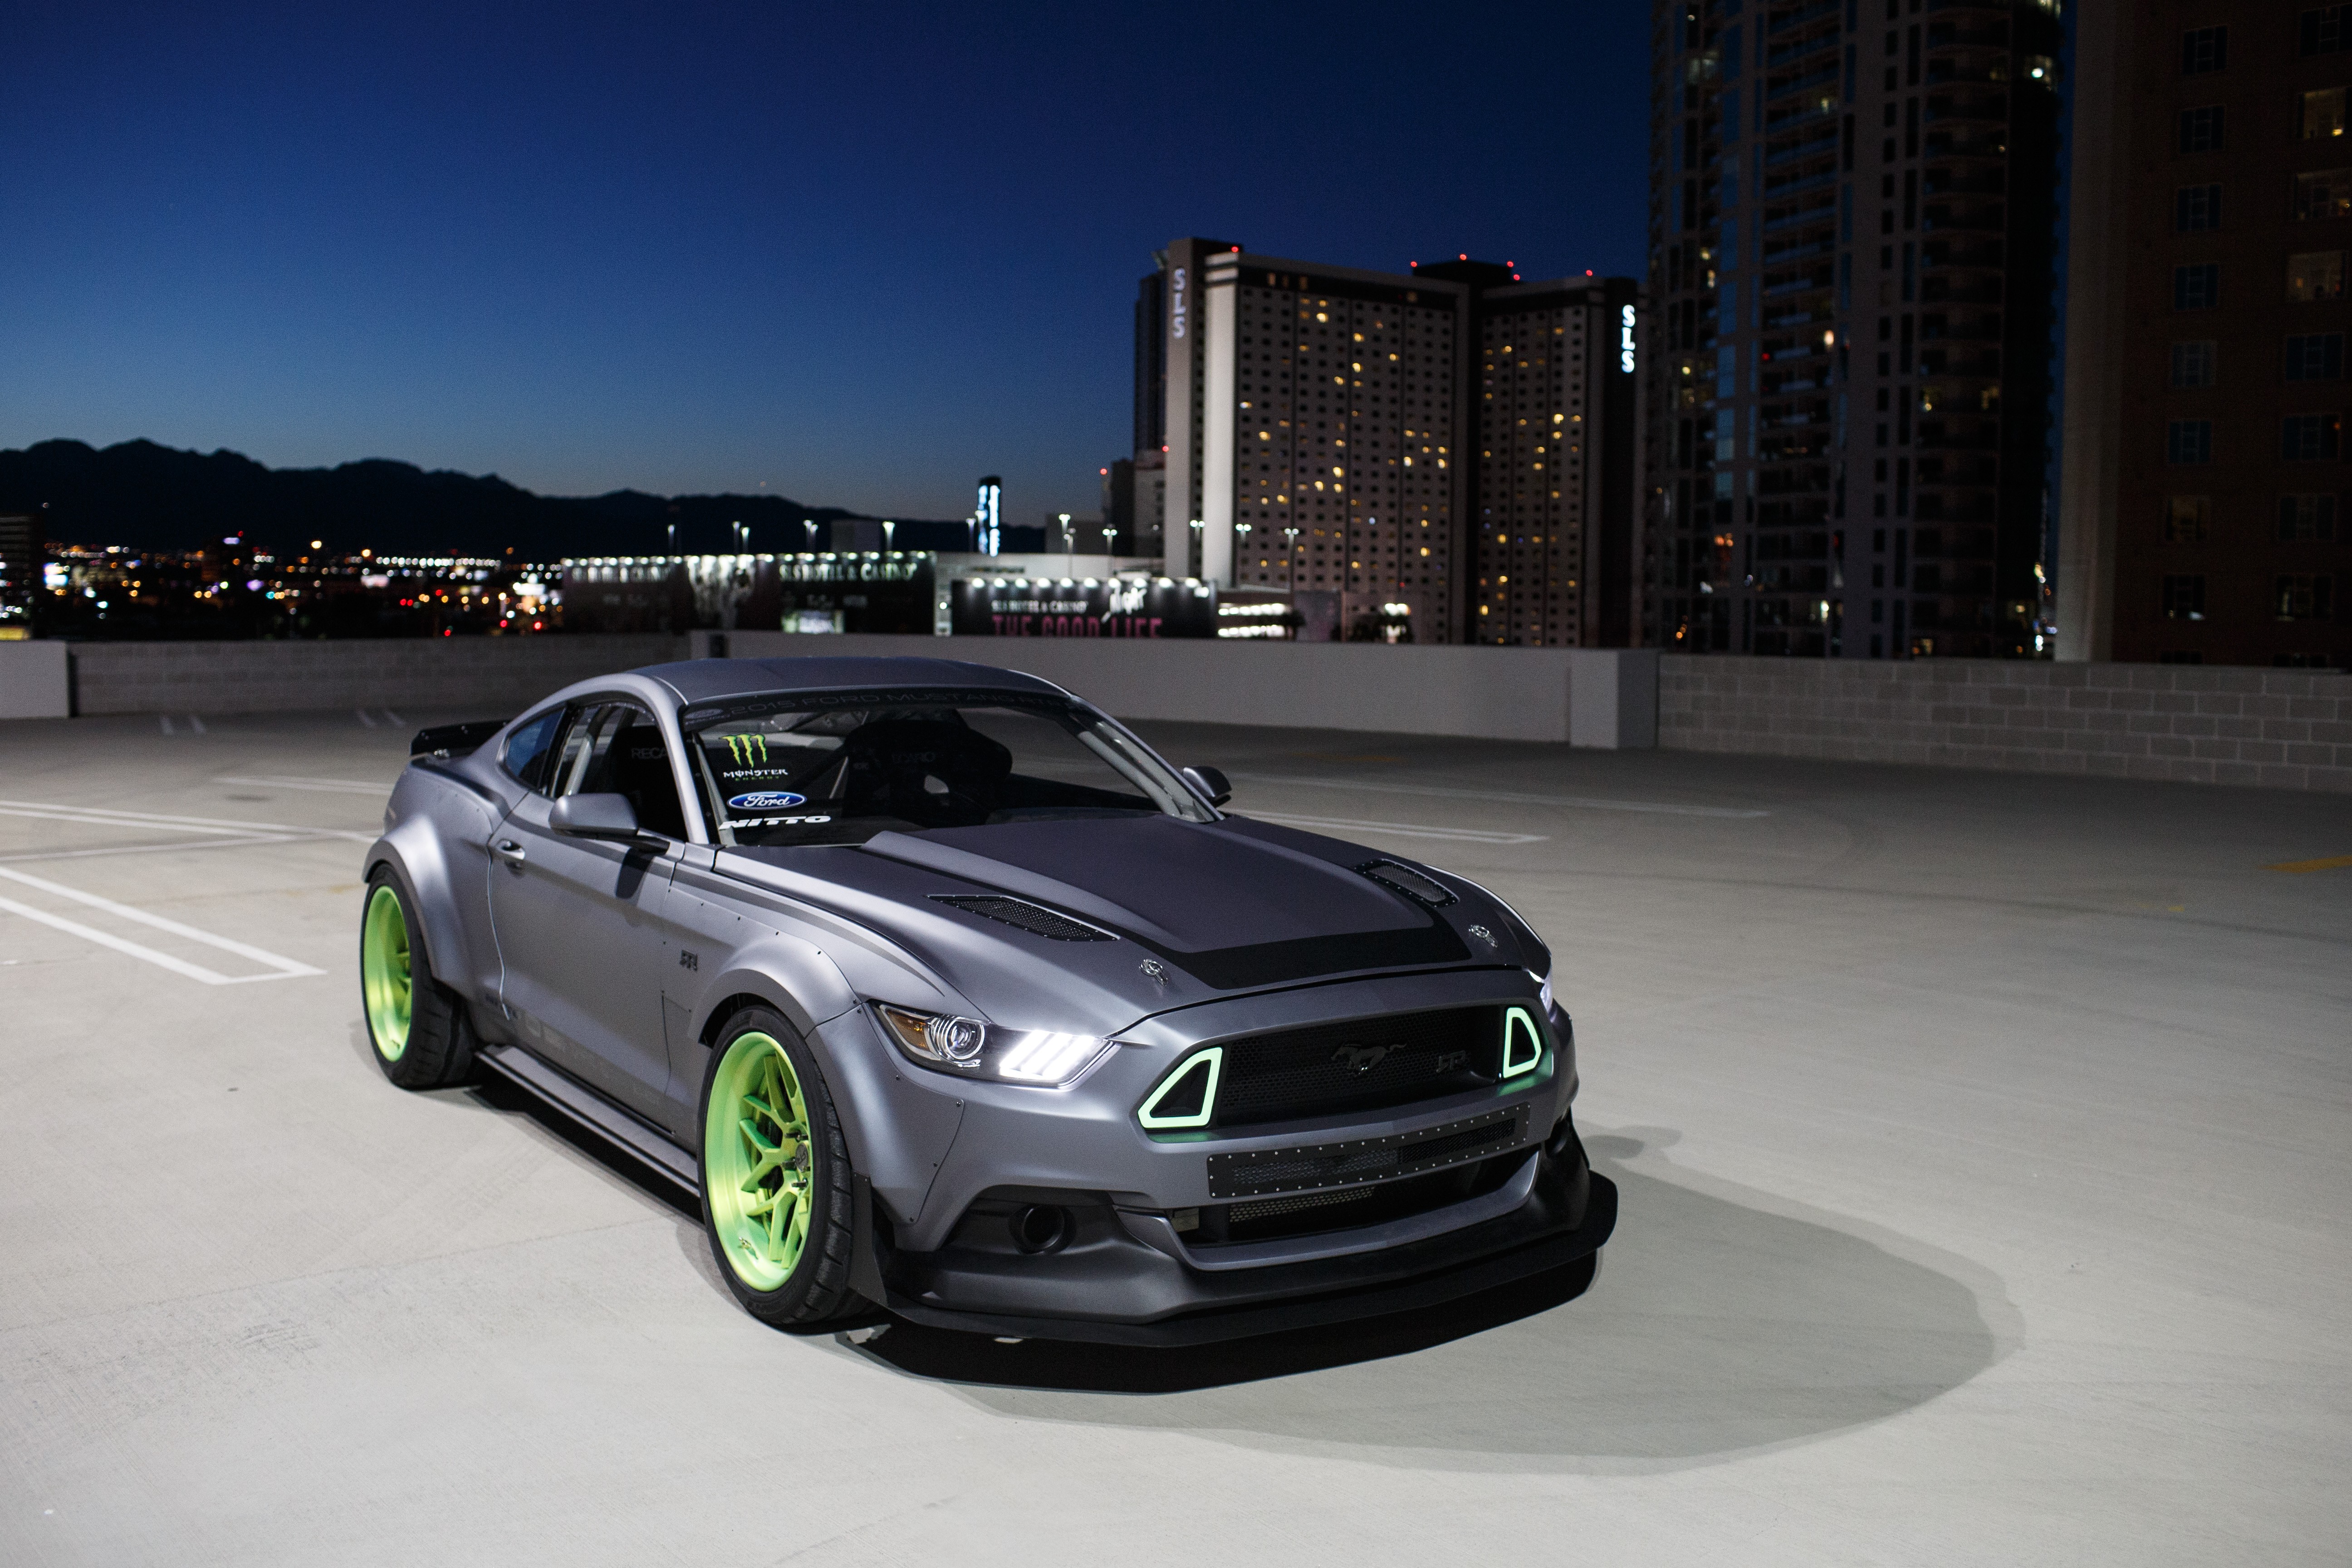 General 5184x3456 Ford Ford Mustang Ford Mustang RTR Vaughn Gittin Jr car vehicle gray cars 2015 (Year) Ford Mustang S550 muscle cars American cars